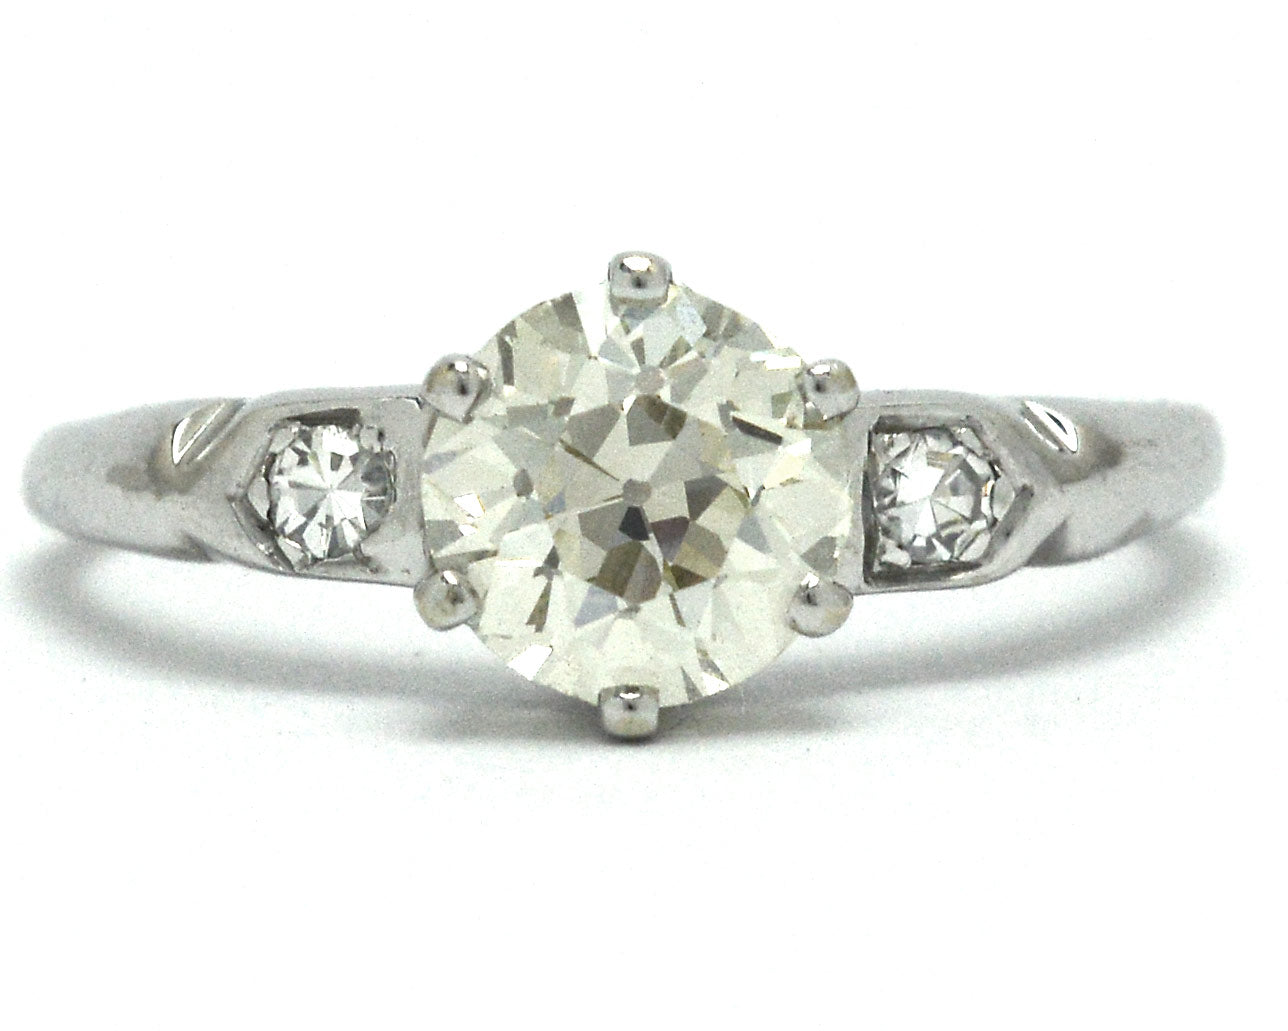 A one carat old European diamond is supported by 6 prongs in this white gold design.